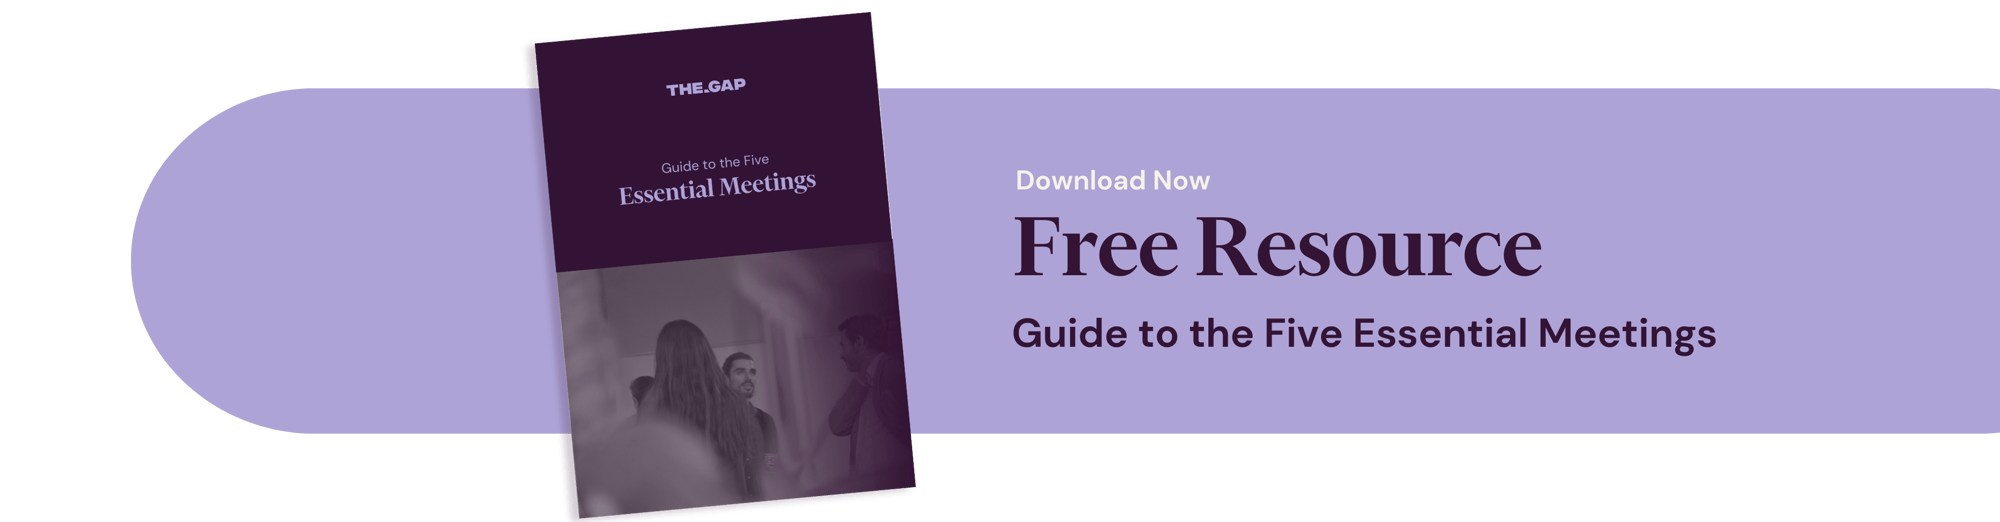 Guide to the Five  Essential Meetings - DOWNLOAD - Option 4 (1)